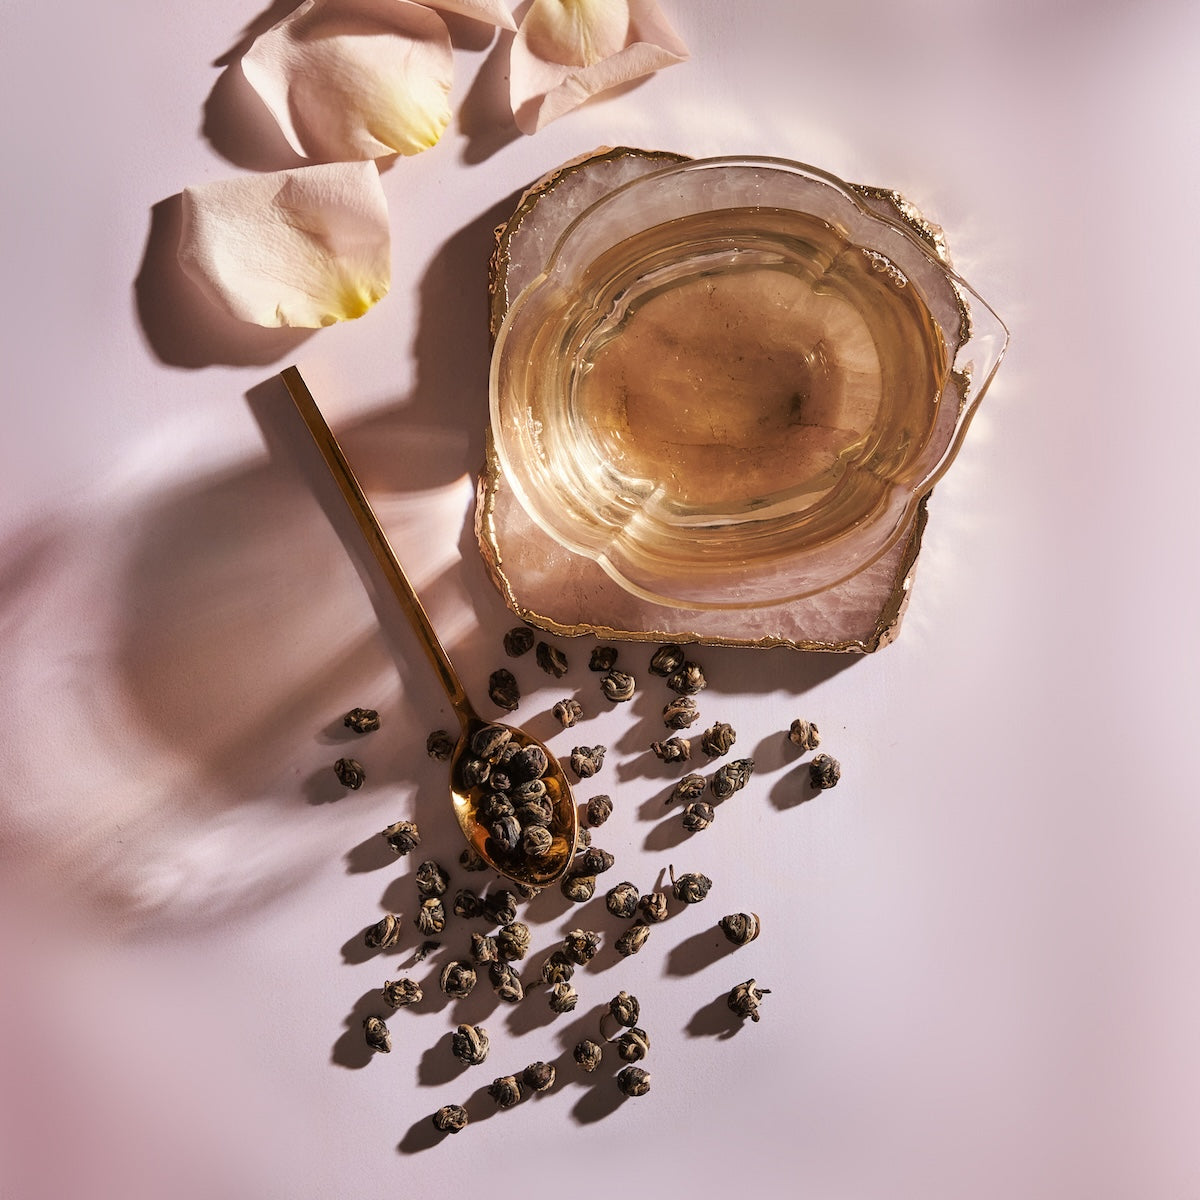 A delicate translucent tea cup with gold edges sits on a pink surface. Beside it, a gold spoon holds Jasmine Pinnacle Pearls Green Tea from Magic Hour, with more pearls scattered around. Light pink rose petals and jasmine flowers are arranged nearby, adding a soft, elegant touch to the serene scene.